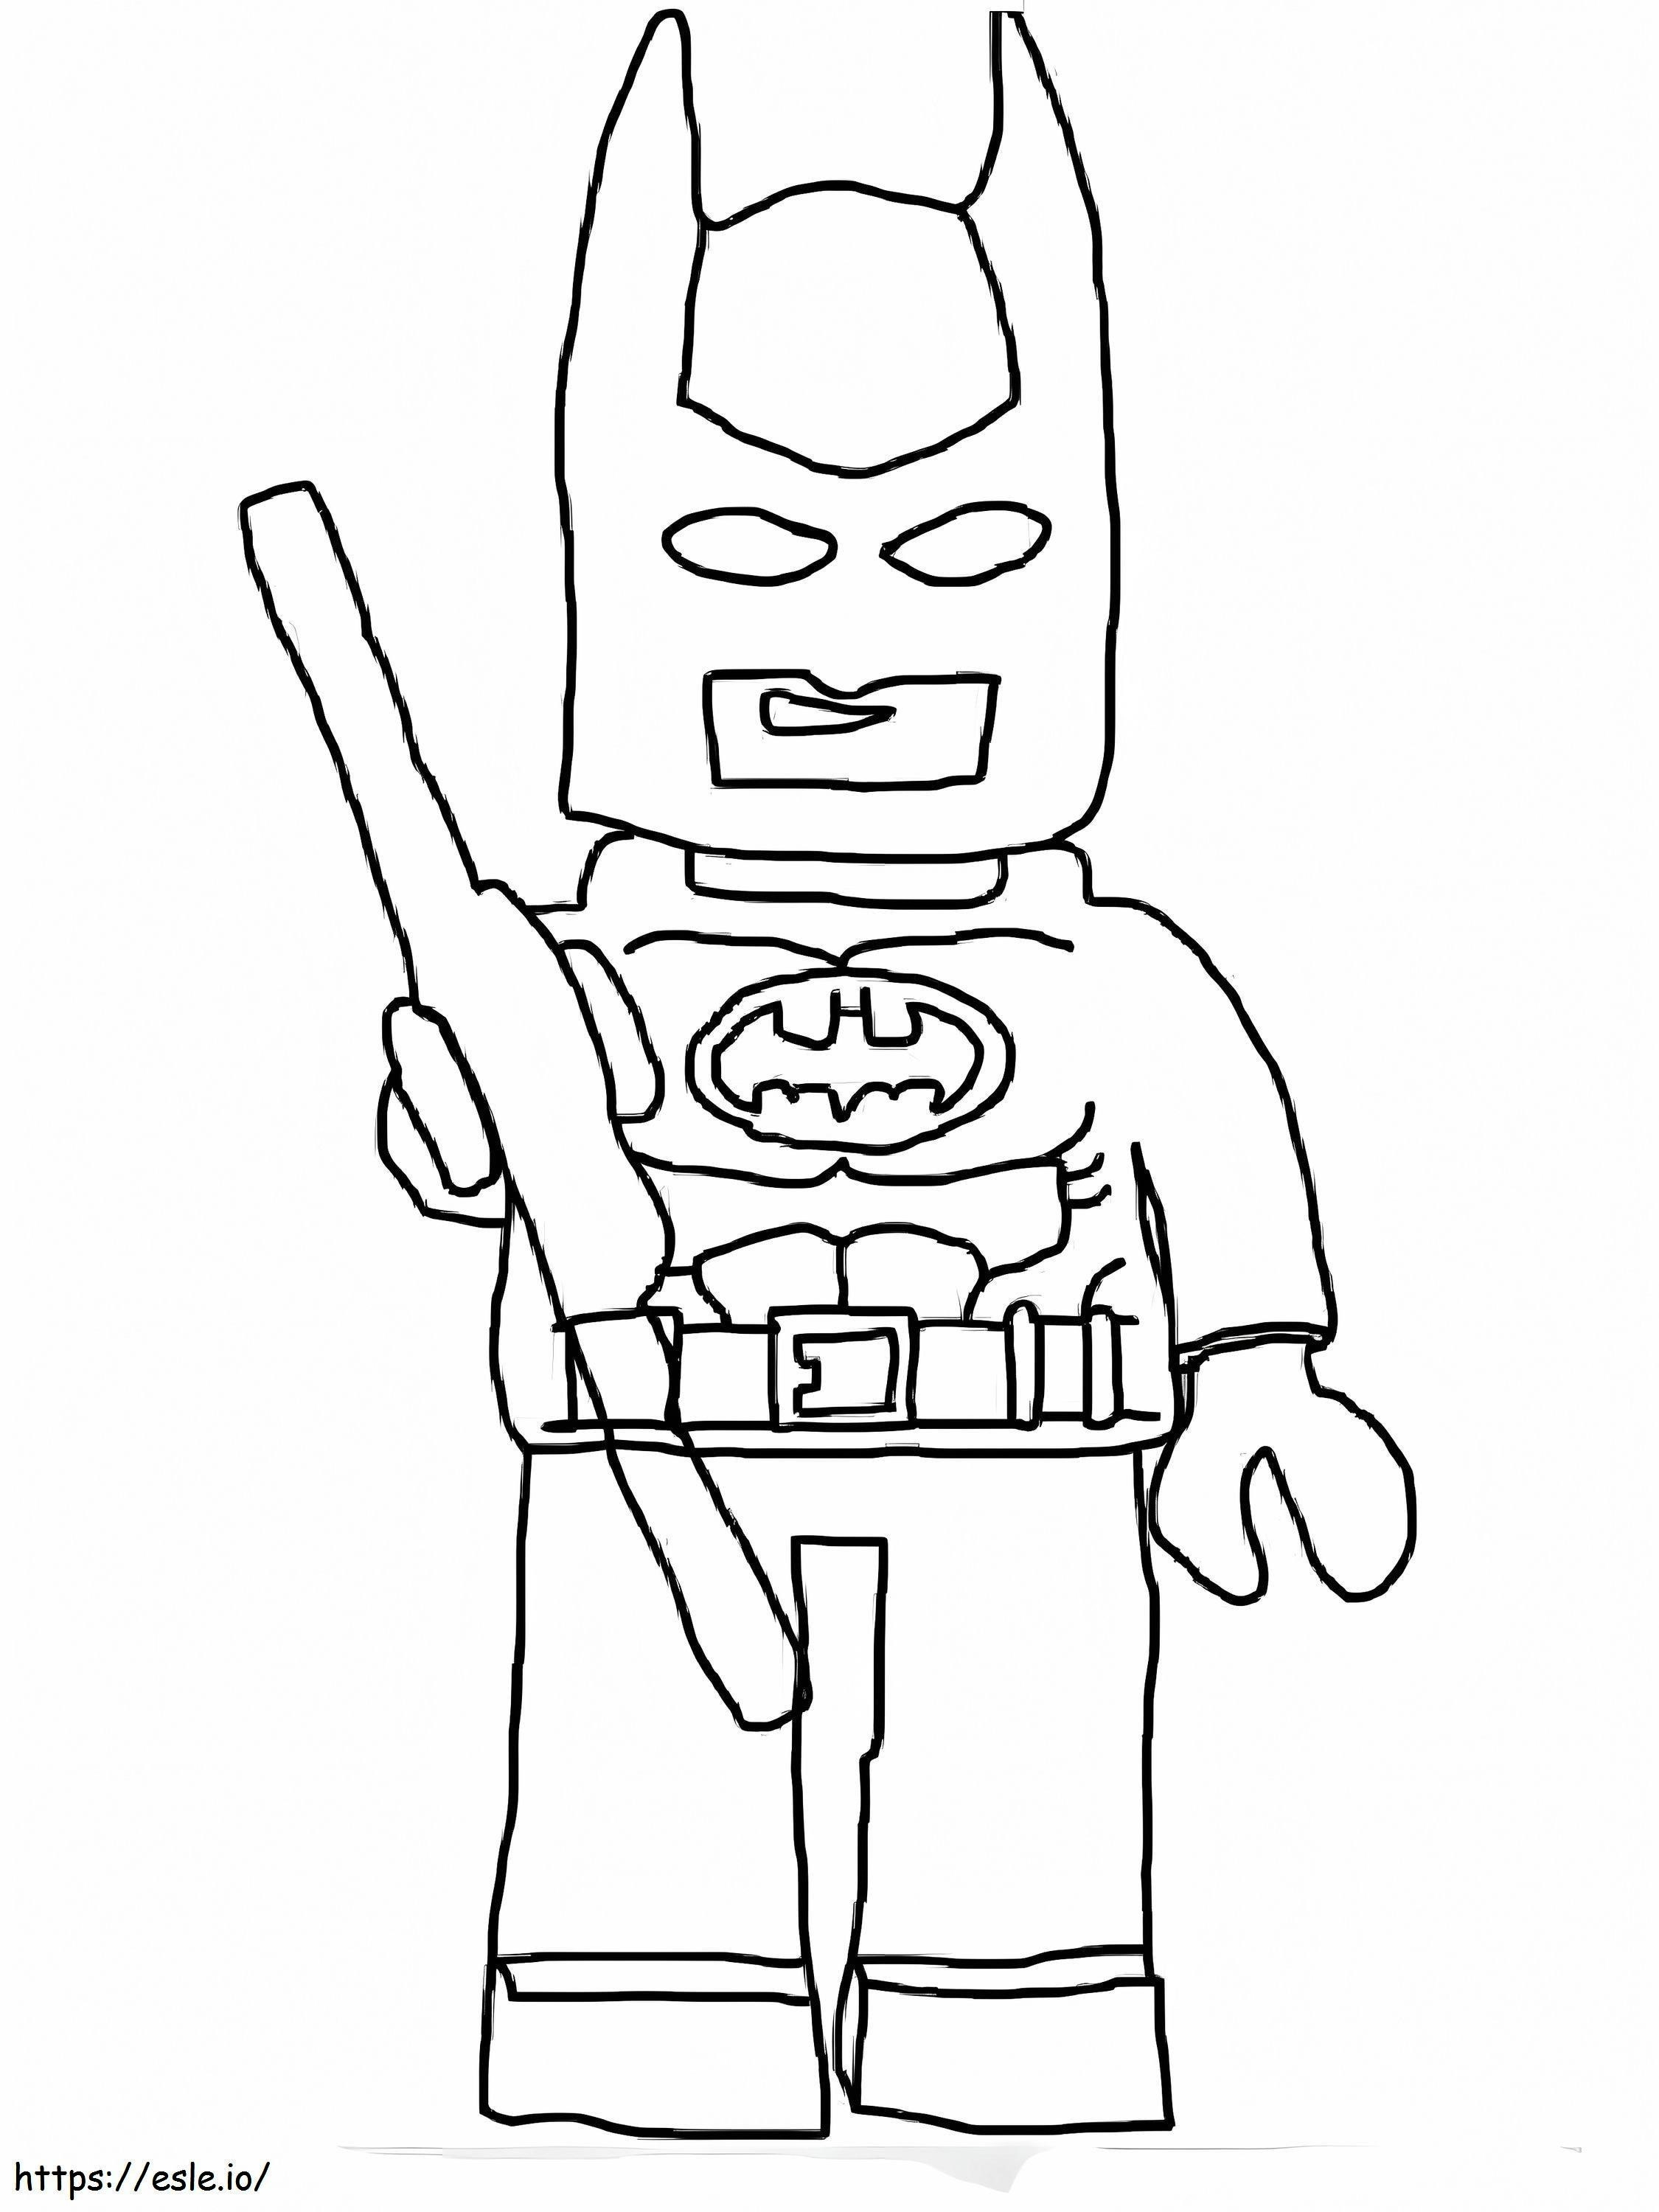 Draw Batman Holding A Stick coloring page